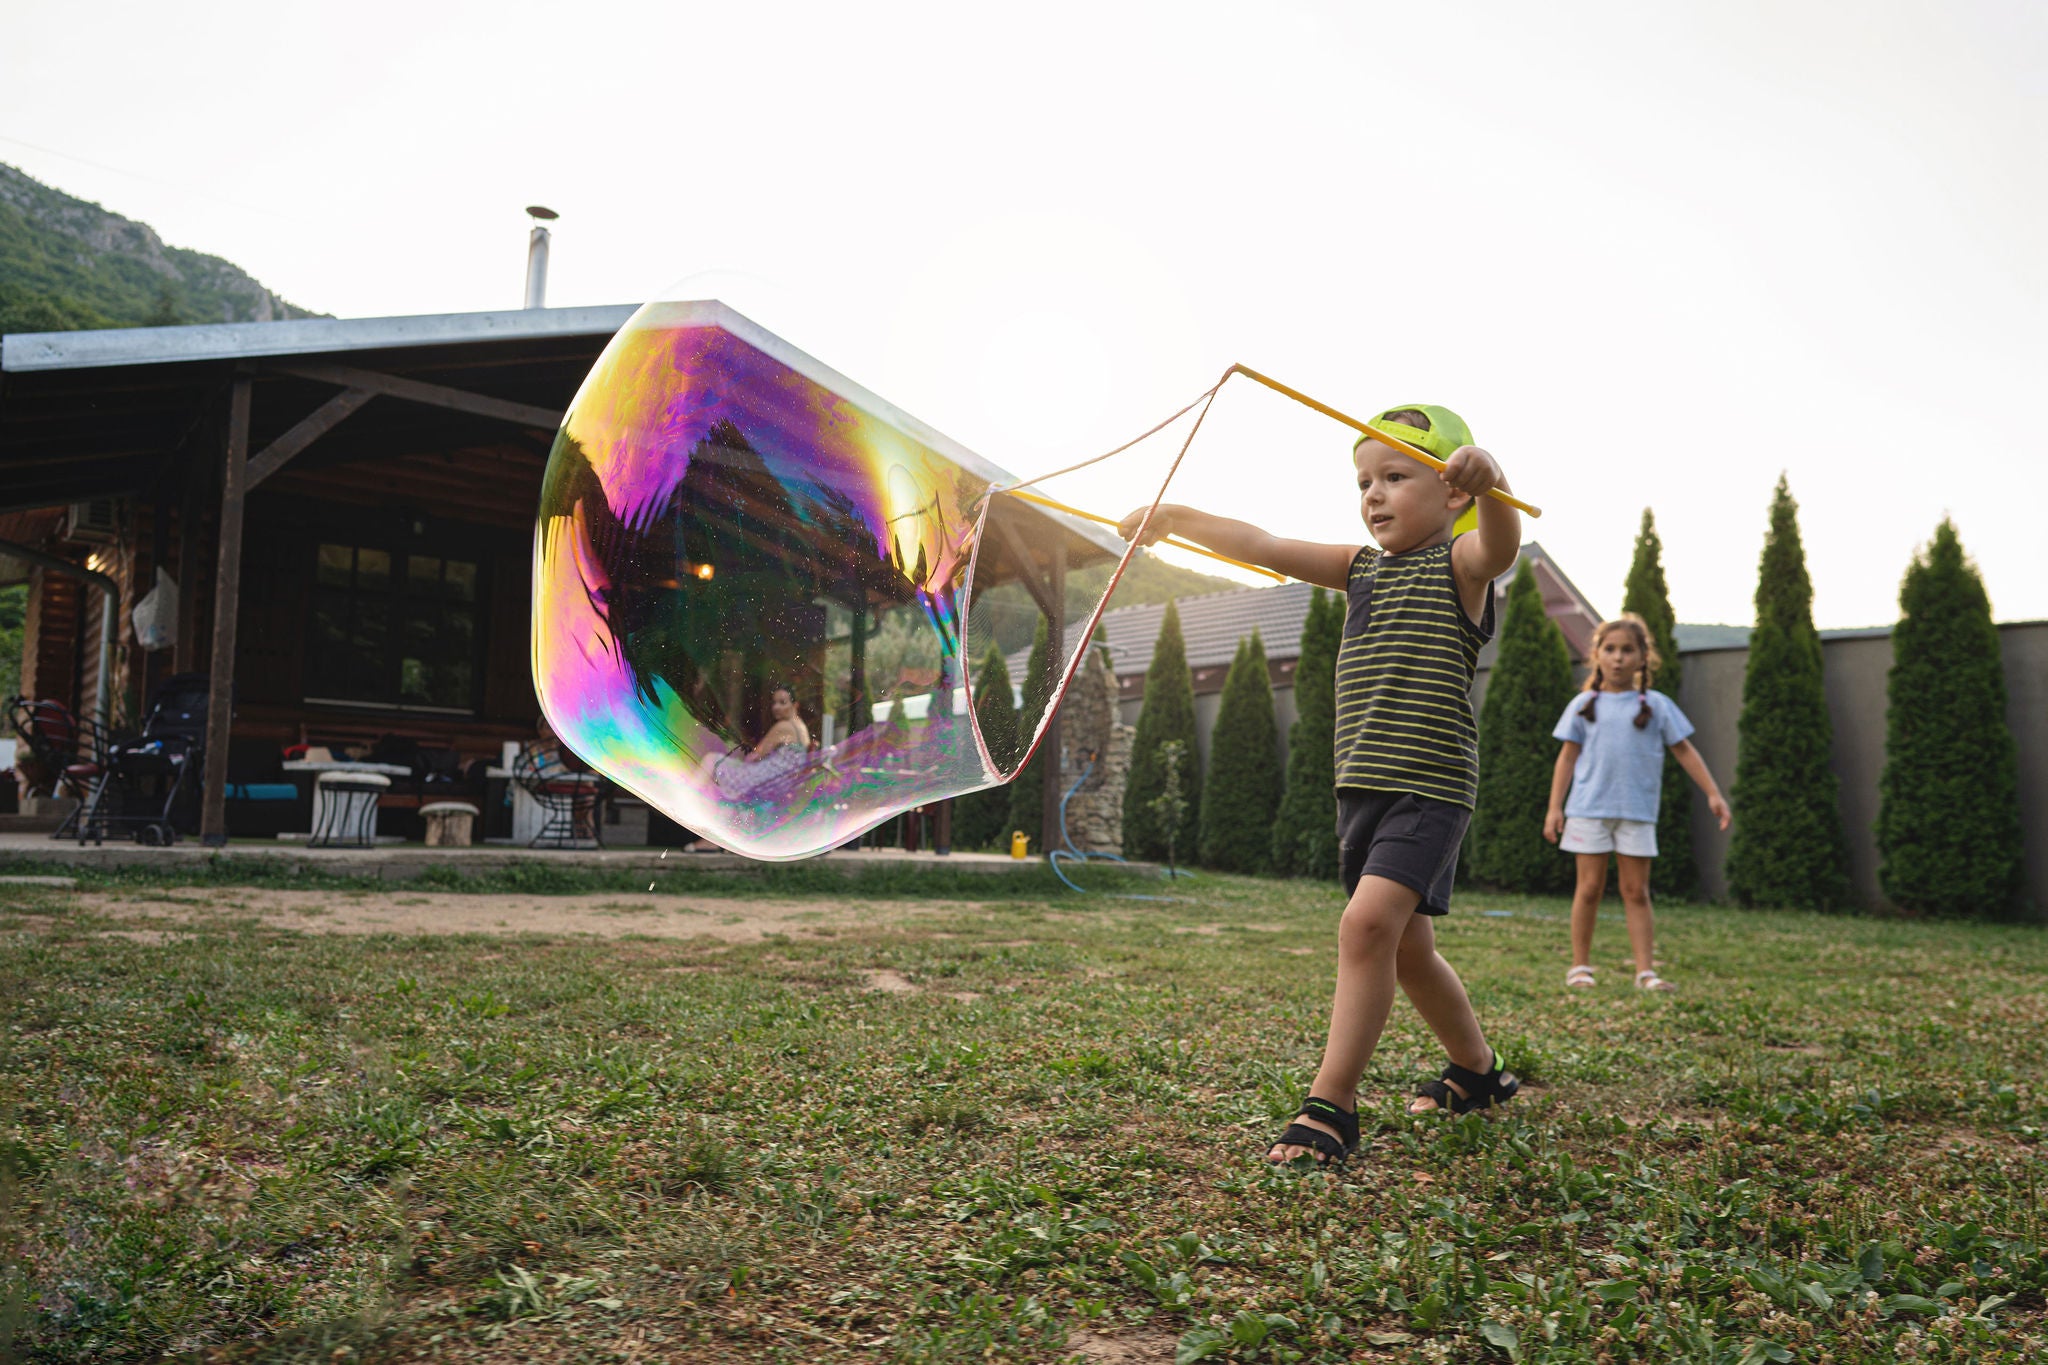 Brother and sister playing together and making a big soap bubble with a bubble wand, during family gathering at the backyard of country house